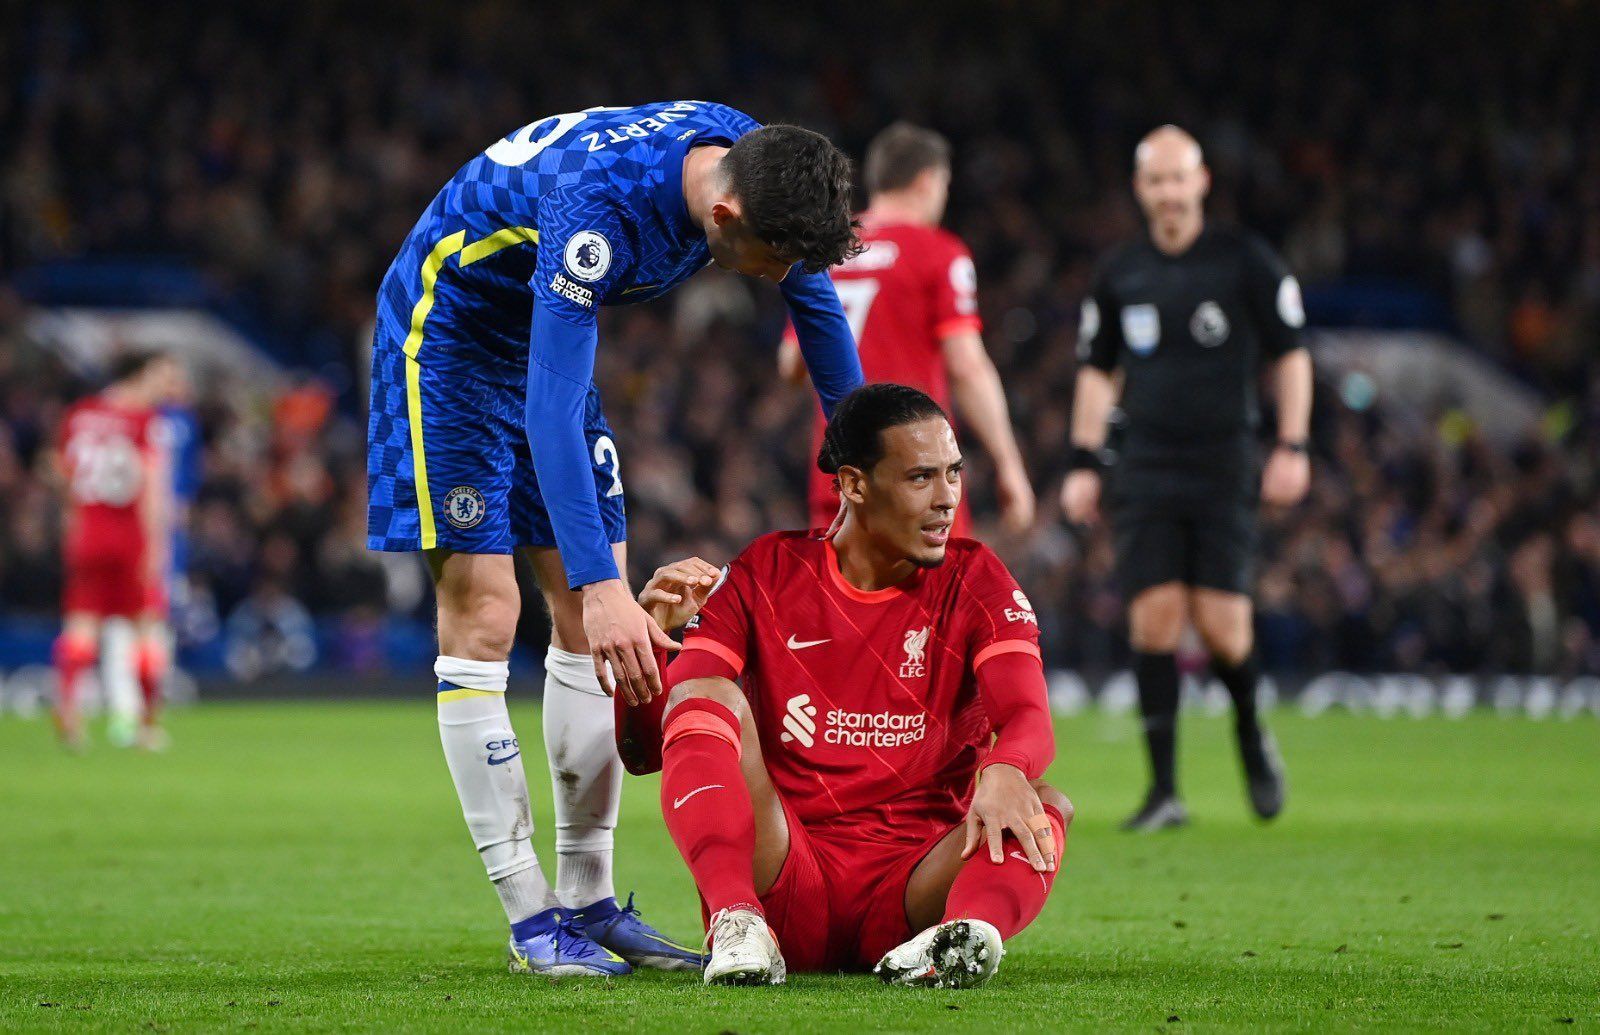 Chelsea came from behind to hold Liverpool to a 2-2 draw.